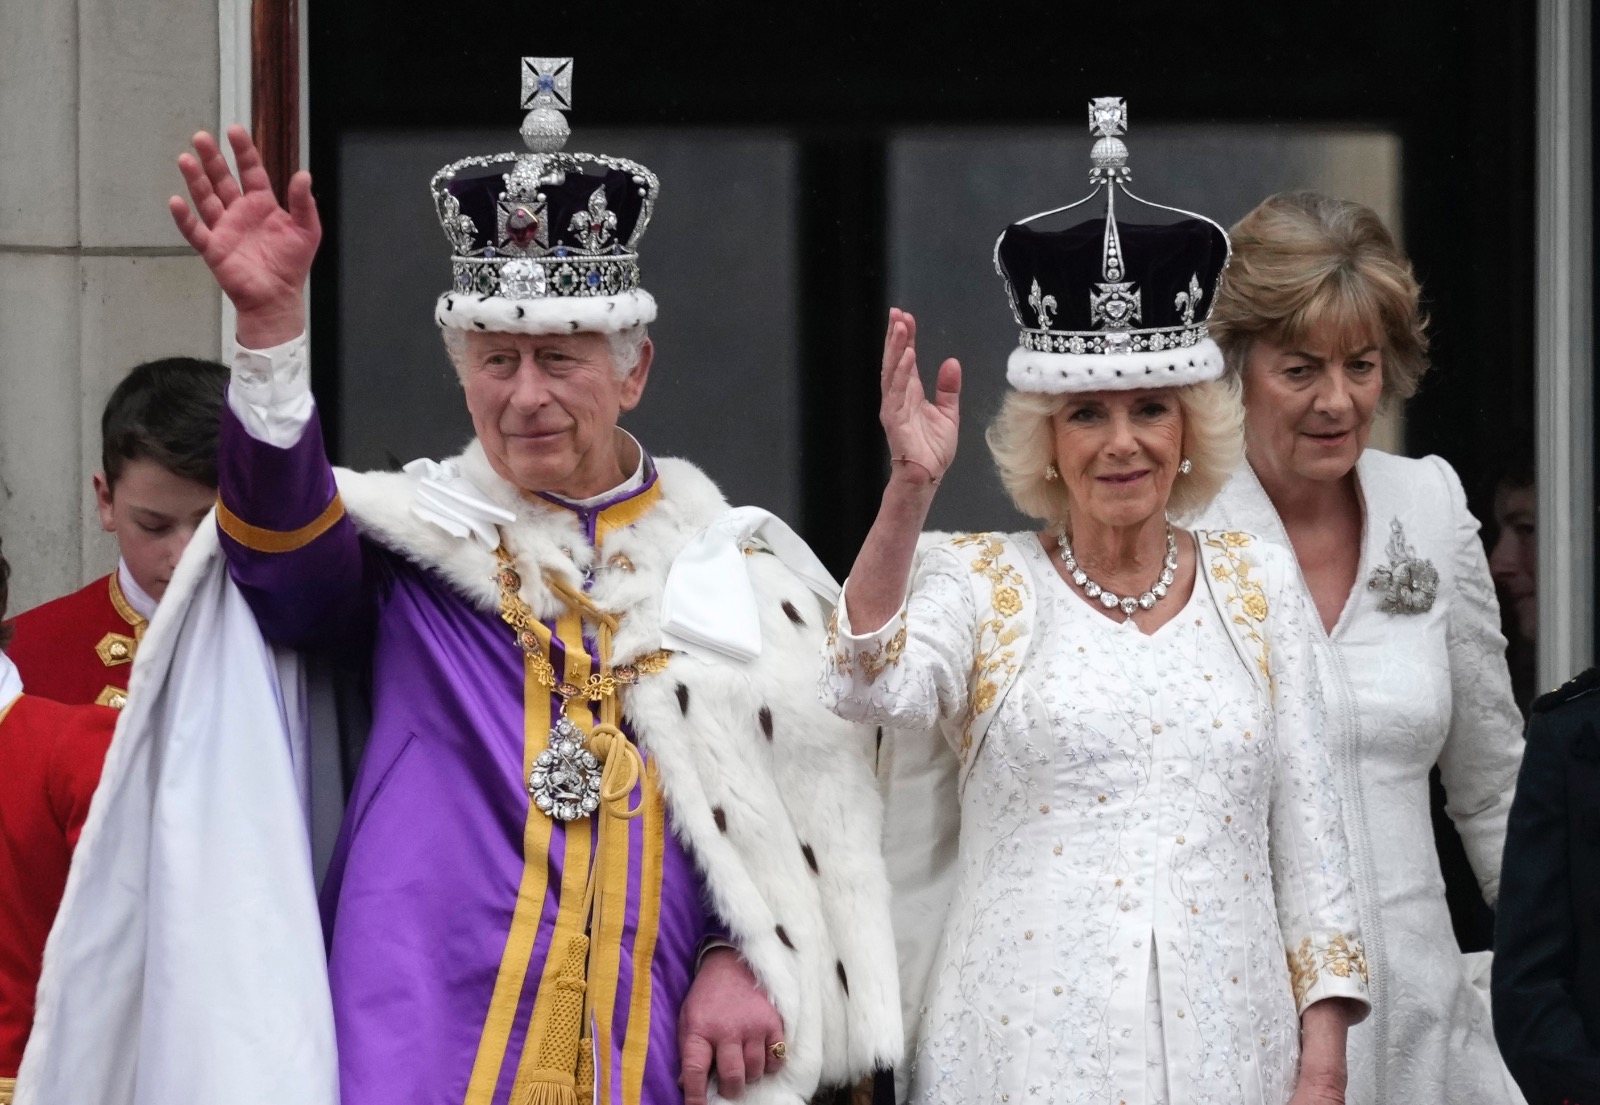 In an emotional ceremony, Charles III was crowned king of England